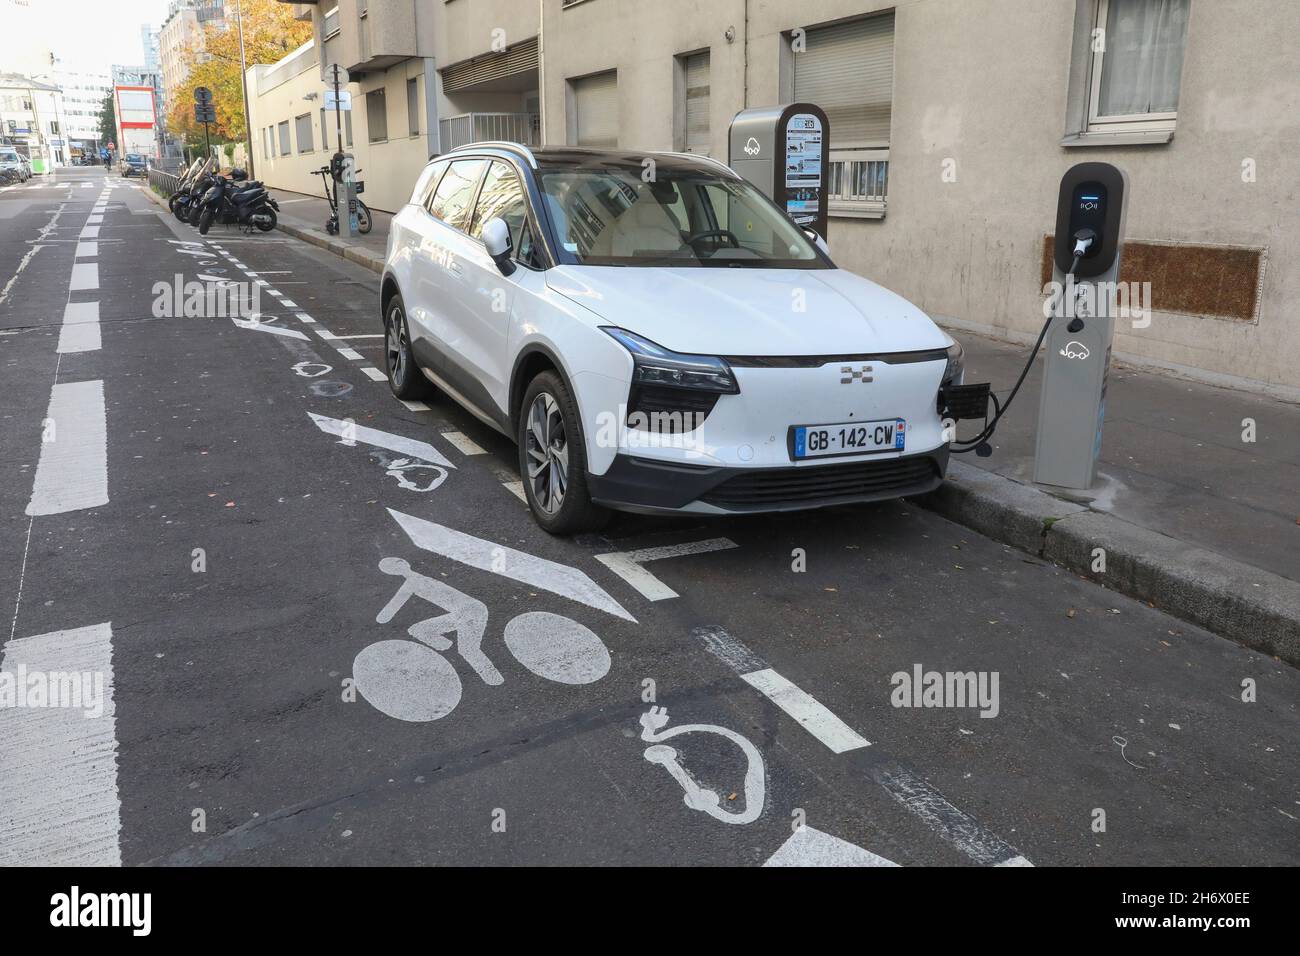 BELIB' THE PUBLIC NETWORK OF ELECTRIC VEHICLE CHARGING STATIONS IN PARIS Stock Photo